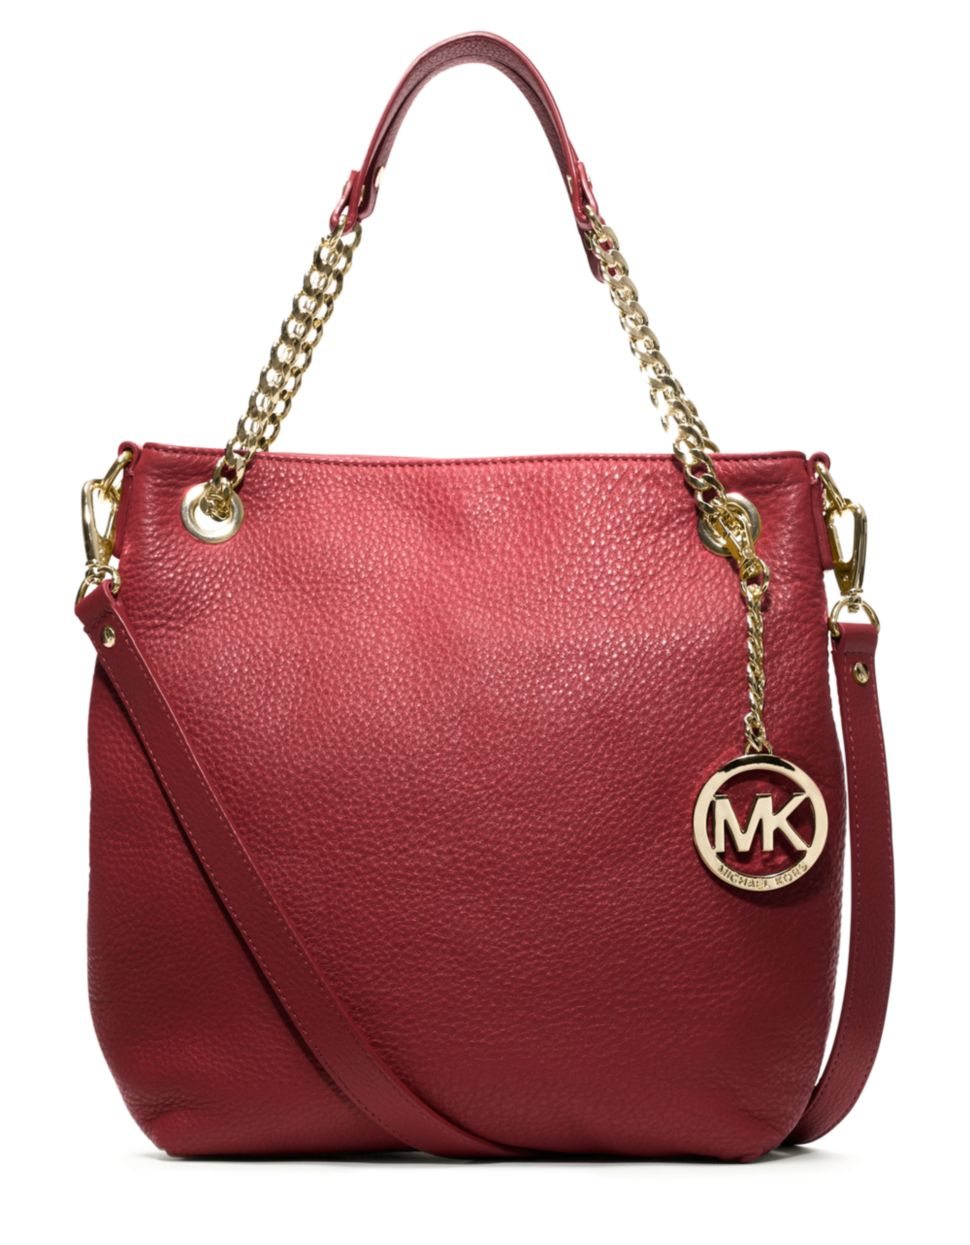 Lyst - Michael Michael Kors Jet Set Medium Chain Leather Tote Bag in Red